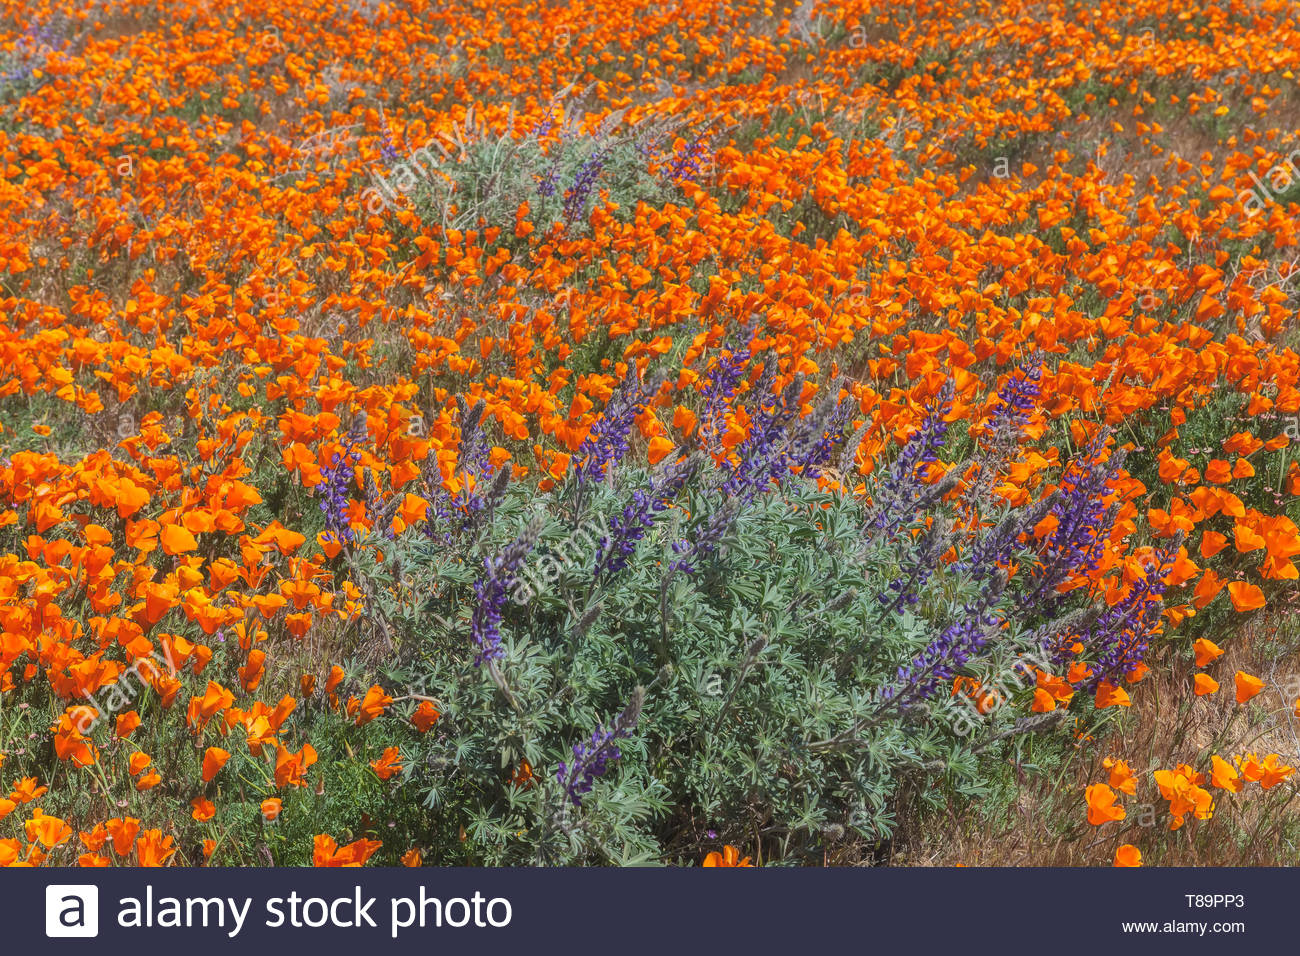 Soda Grape Lupine Flowers With California Poppies In Background